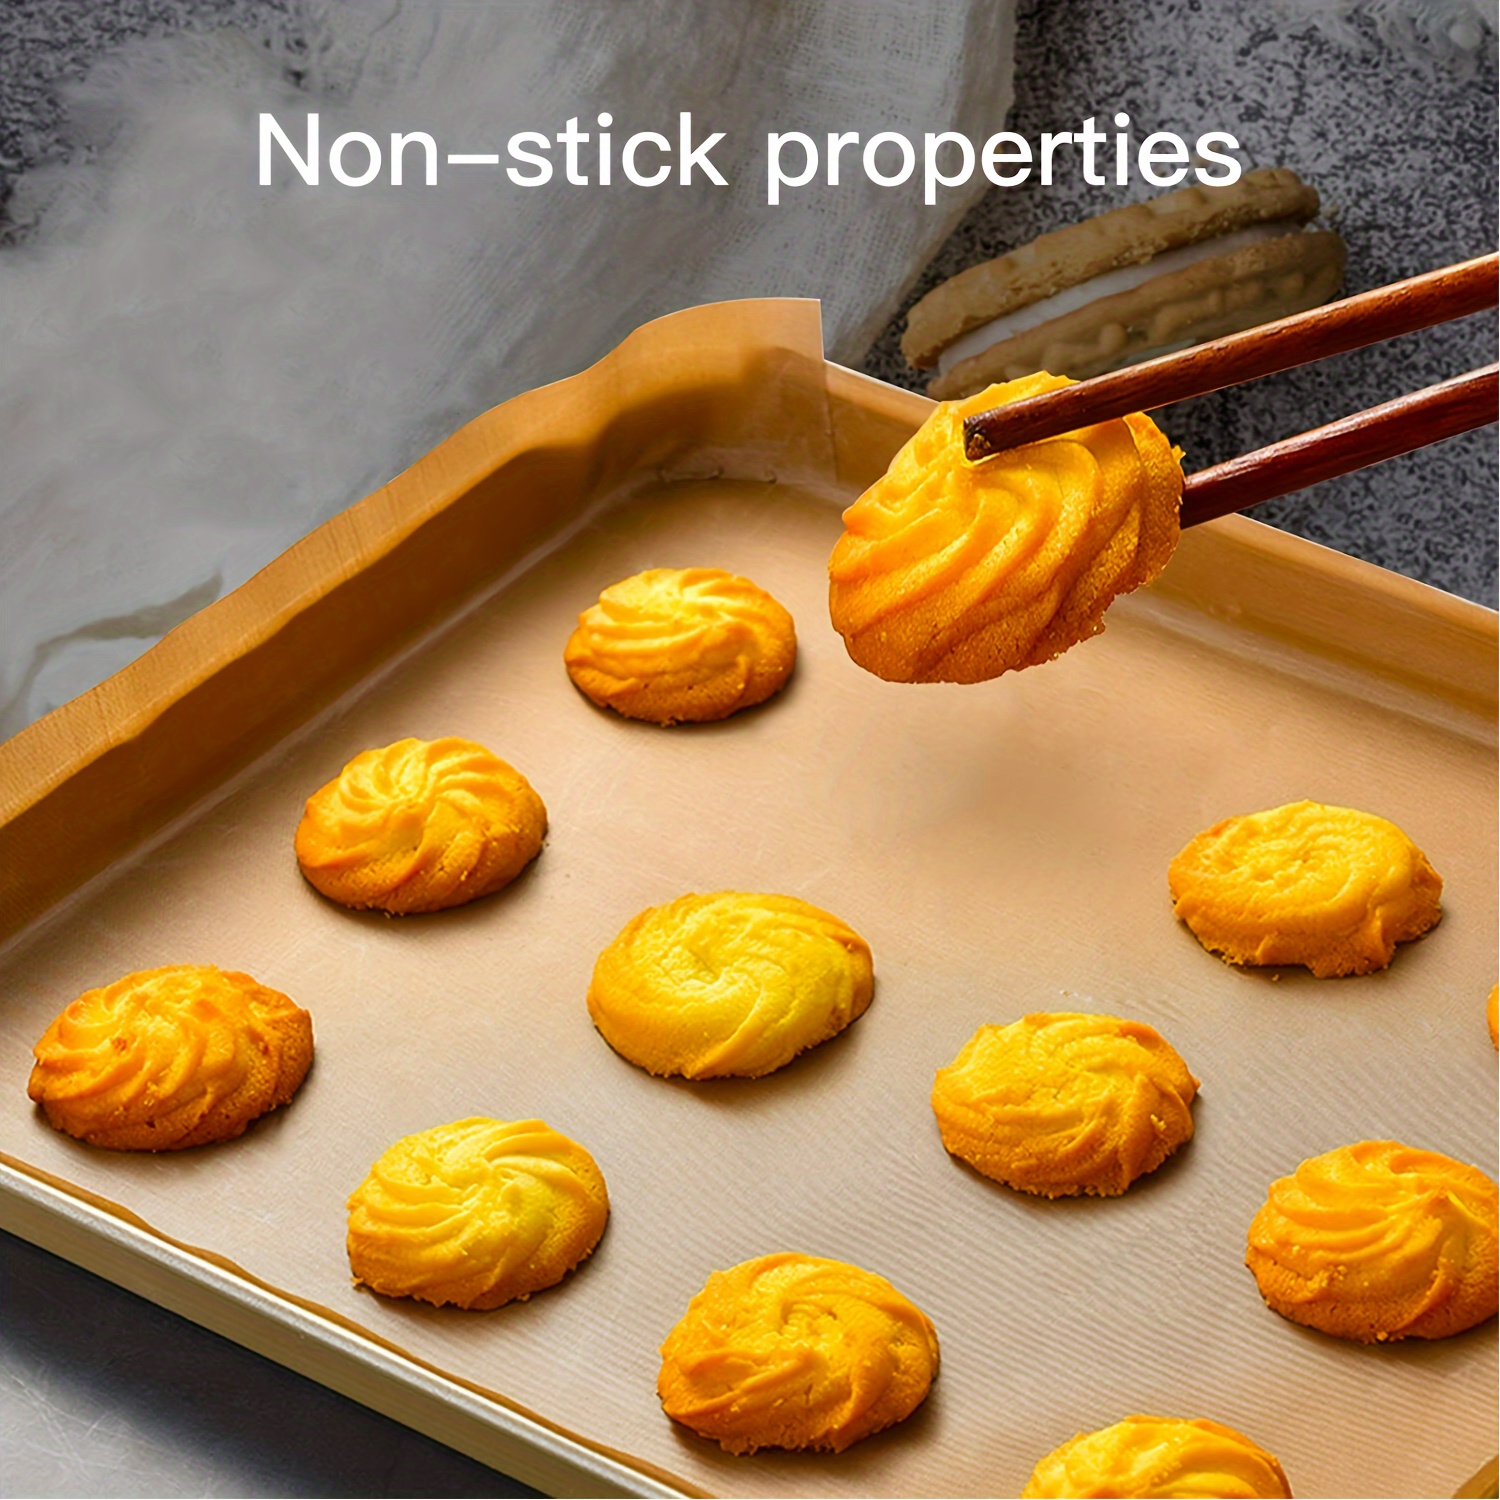 Reusable Resistant Baking Mat Non-stick Coating 60*40cm Sheet Baking Paper  Grill Liner Oil-proof Cooking Pad Sheet Baking Tools